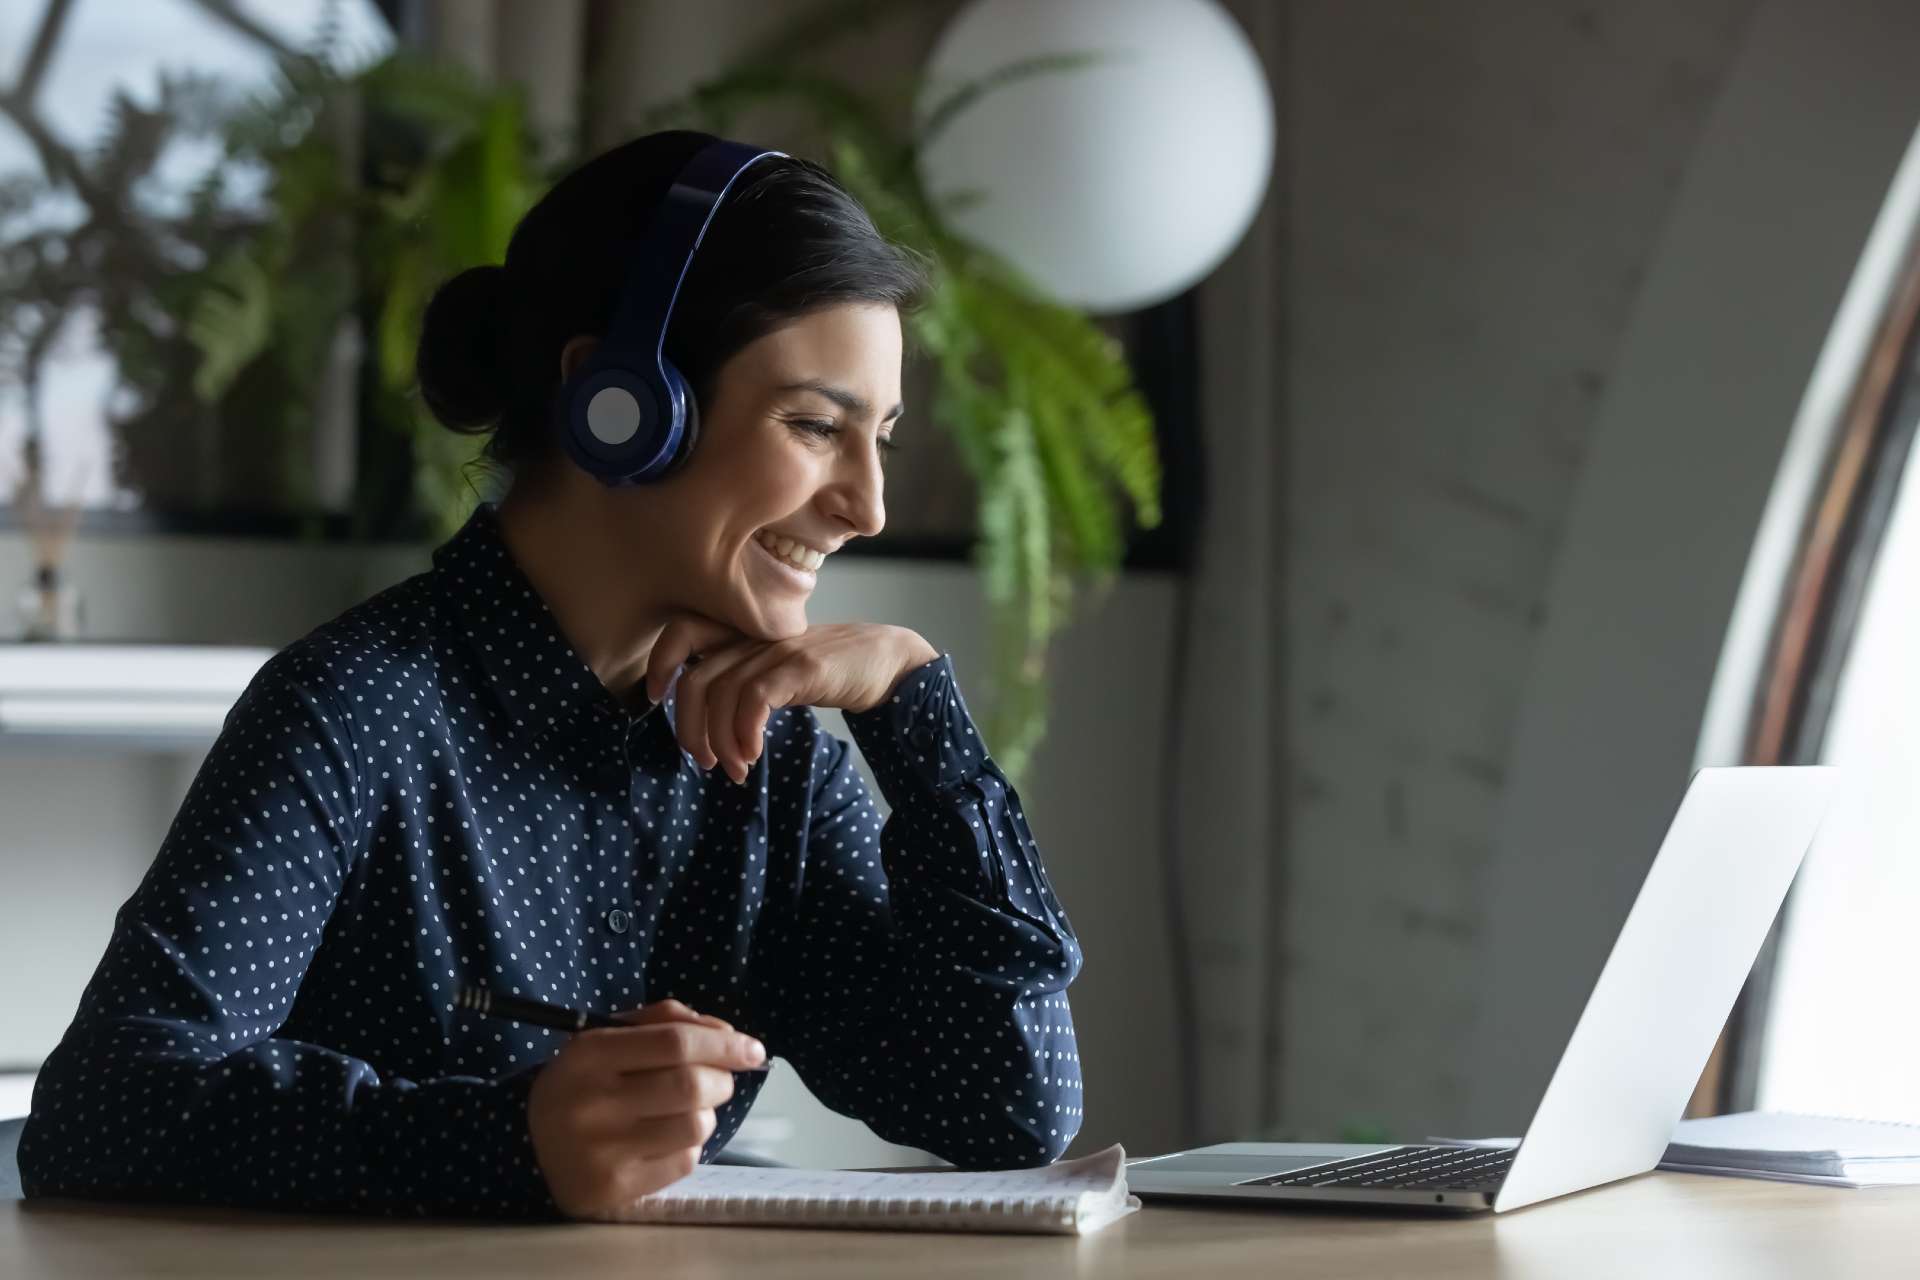 Woman smiling with headset and laptop